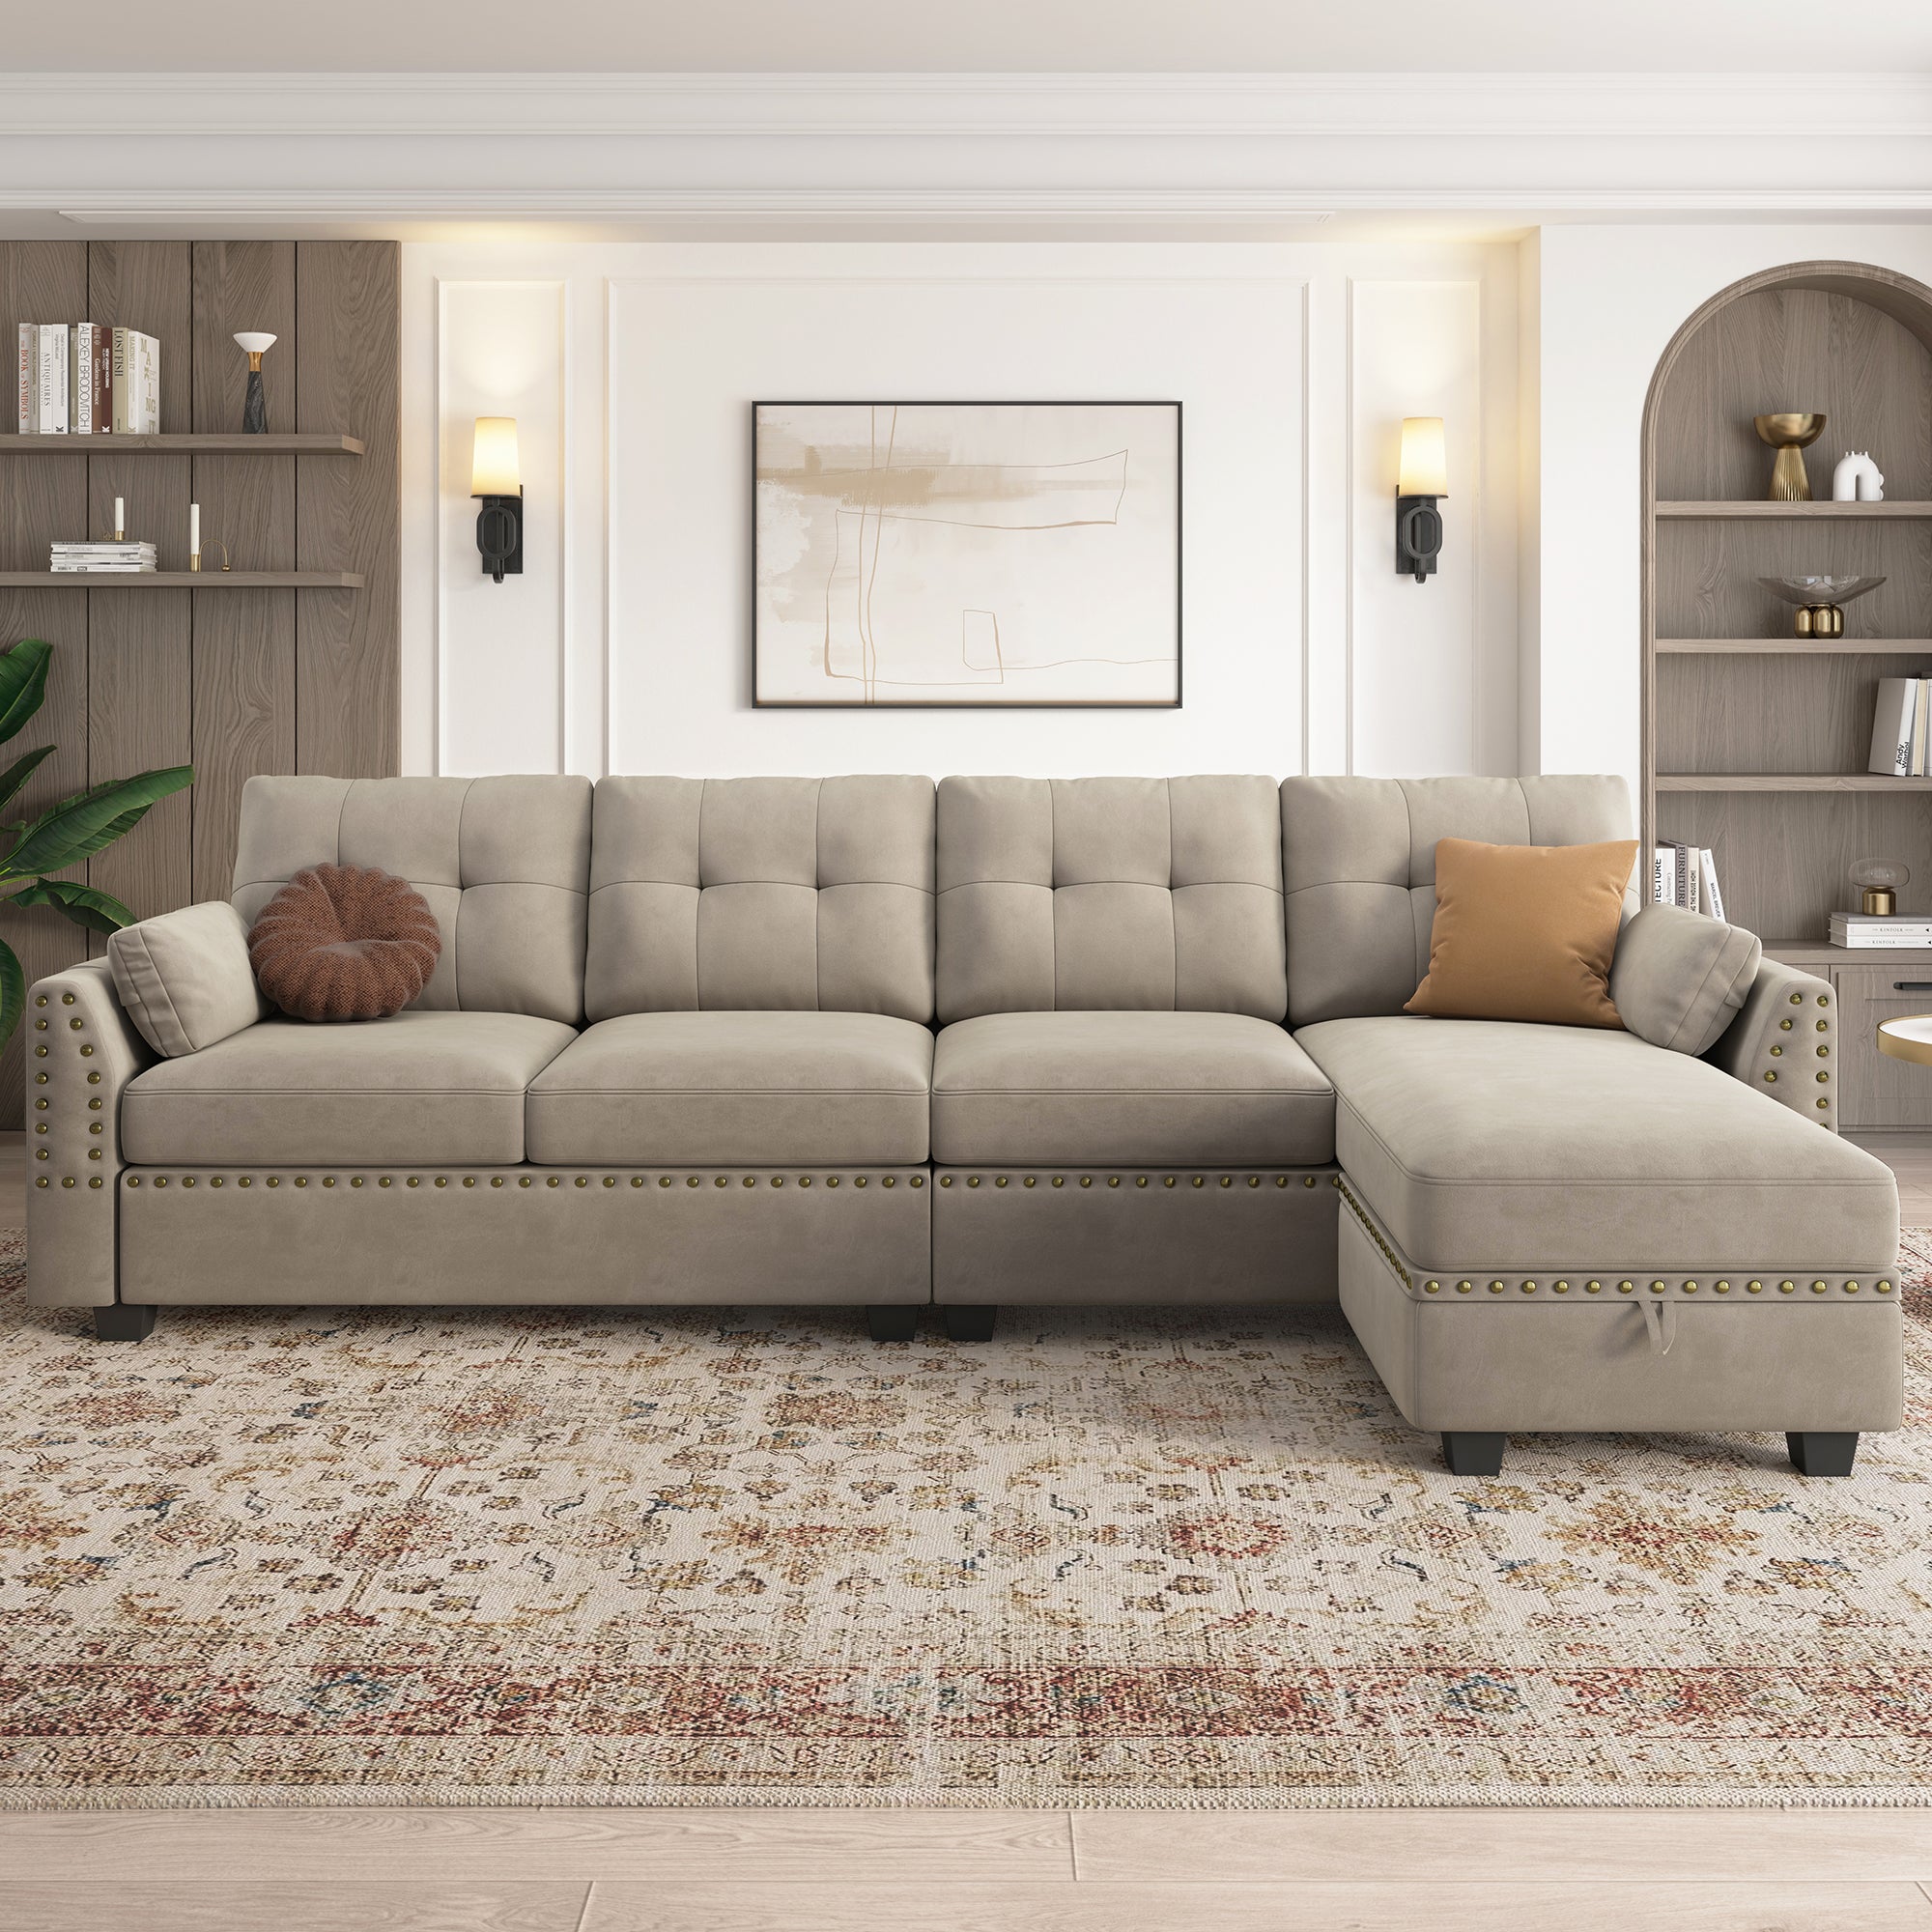 HONBAY Velvet 4-Seat L-Shaped Sectional Sofa with Storage Chaise